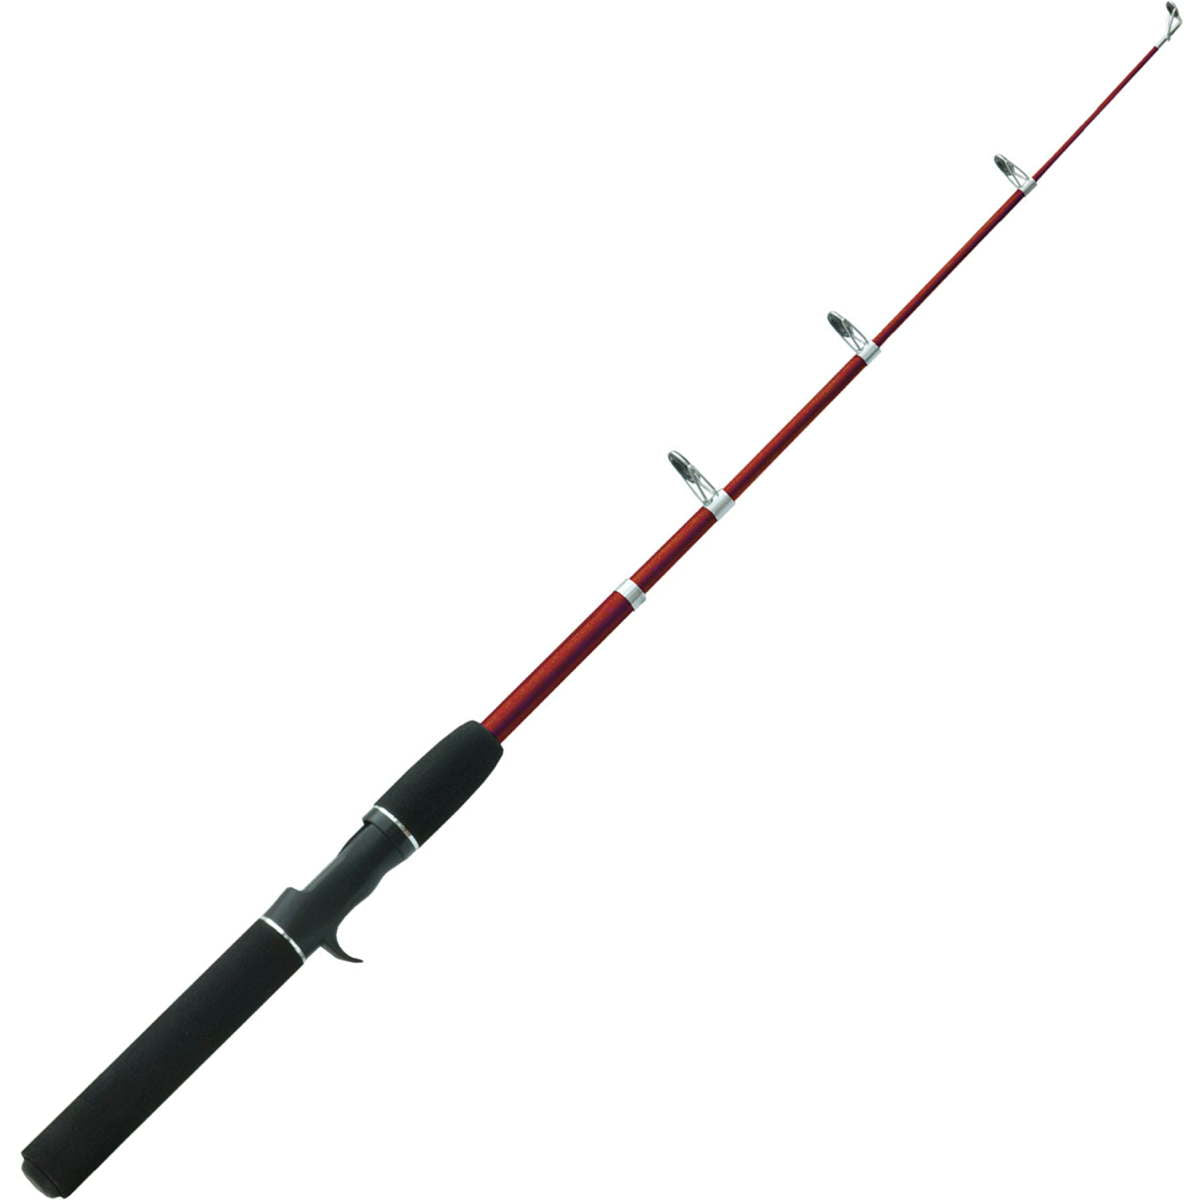 Photo of Zebco Z-Cast Series Telescopic Pistol Grip Casting Rod for sale at United Tackle Shops.